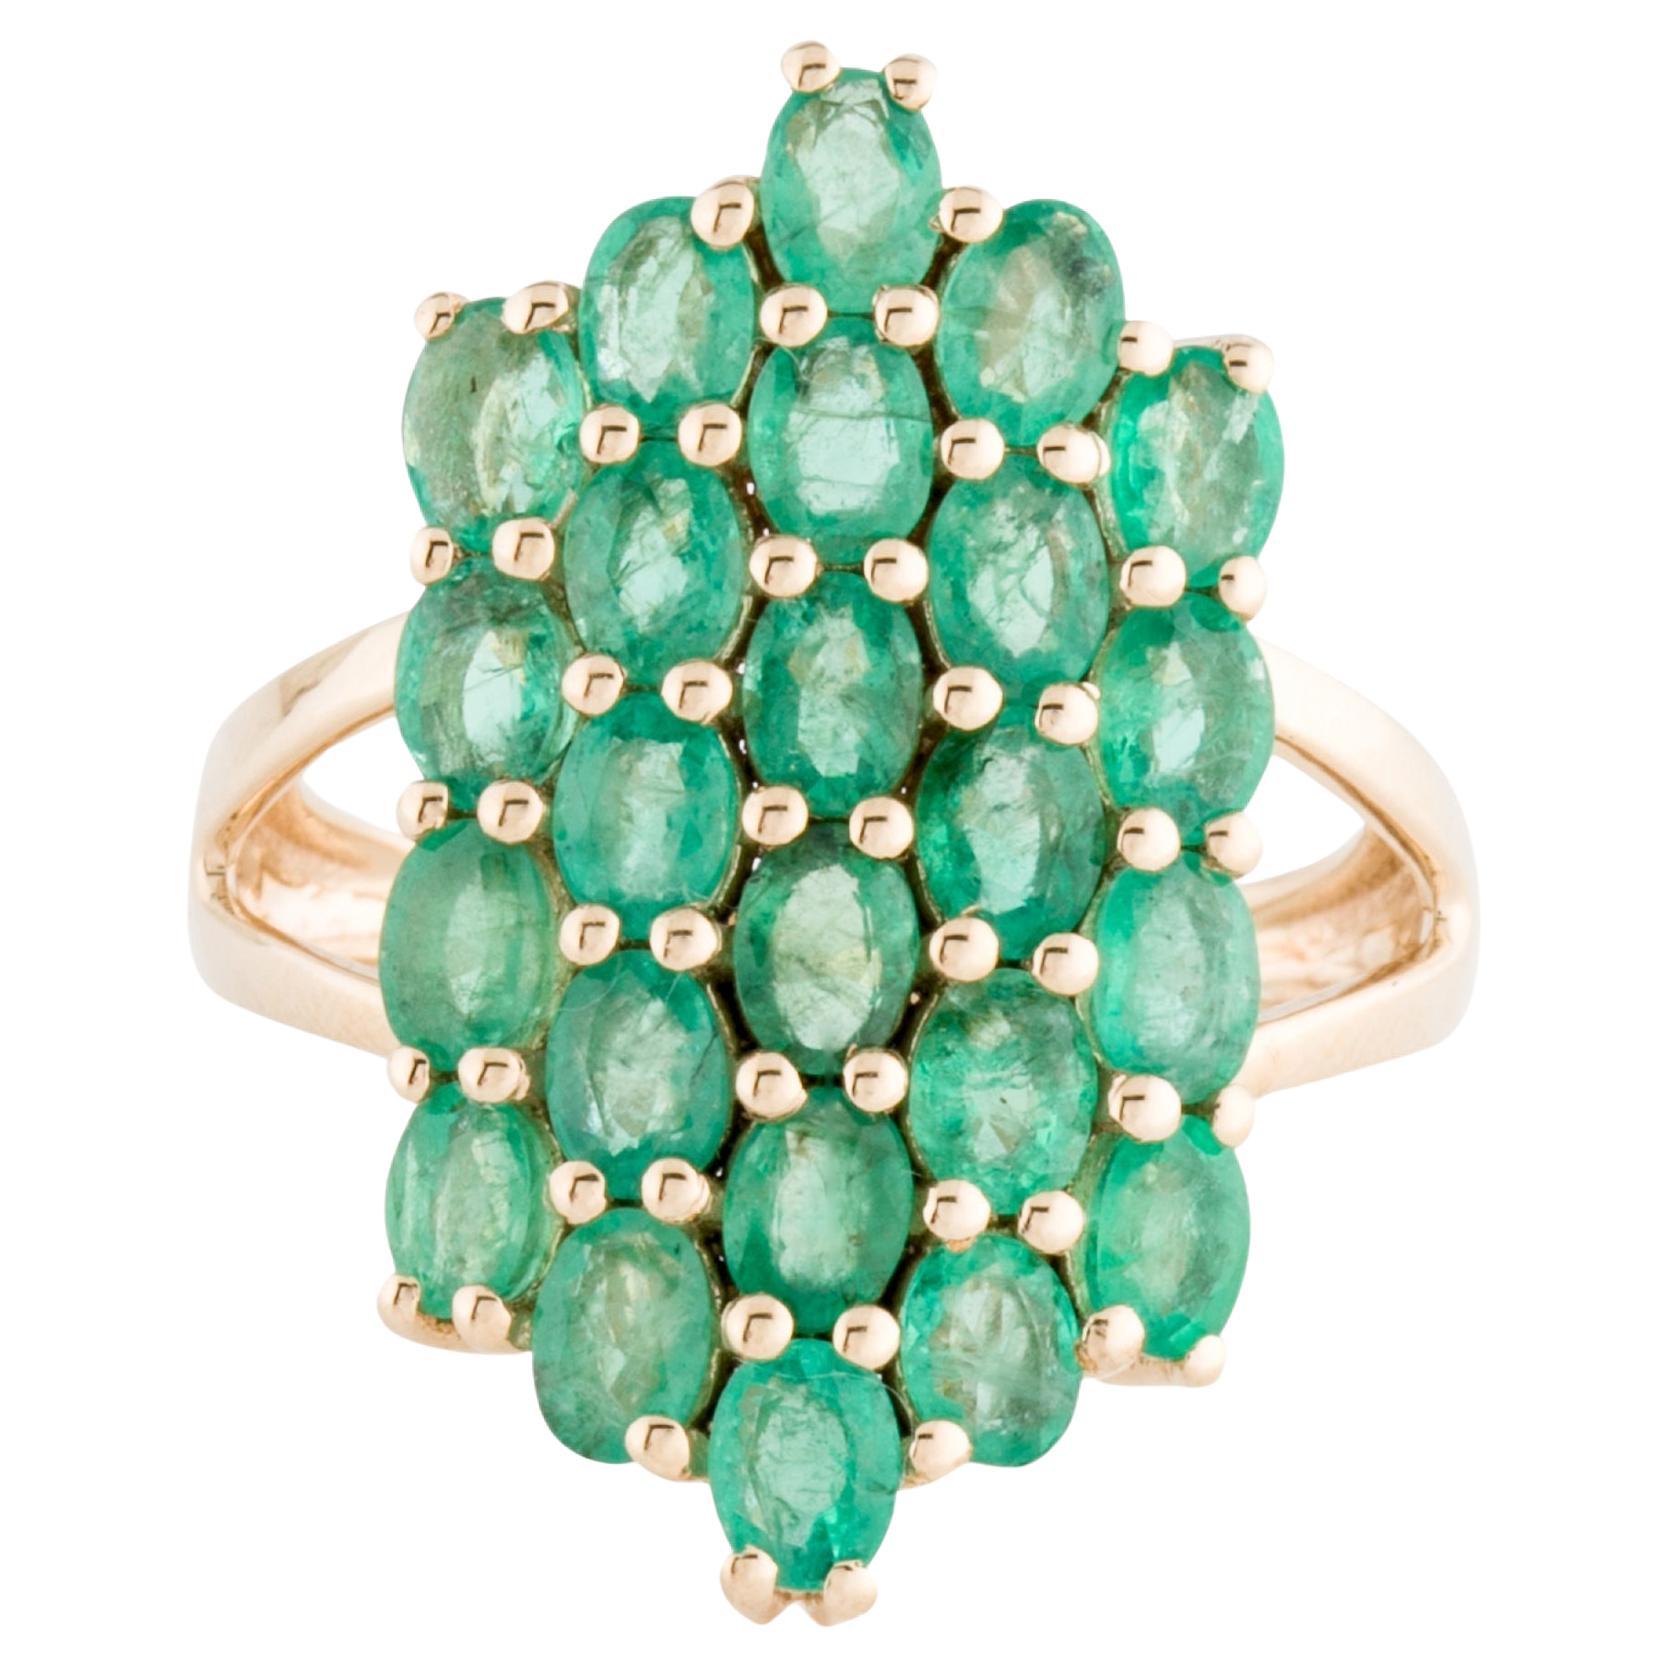 Gorgeous 14K Emerald Cocktail Ring - 2.59ctw Gemstones - Size 6.75 Vintage Ring For Sale